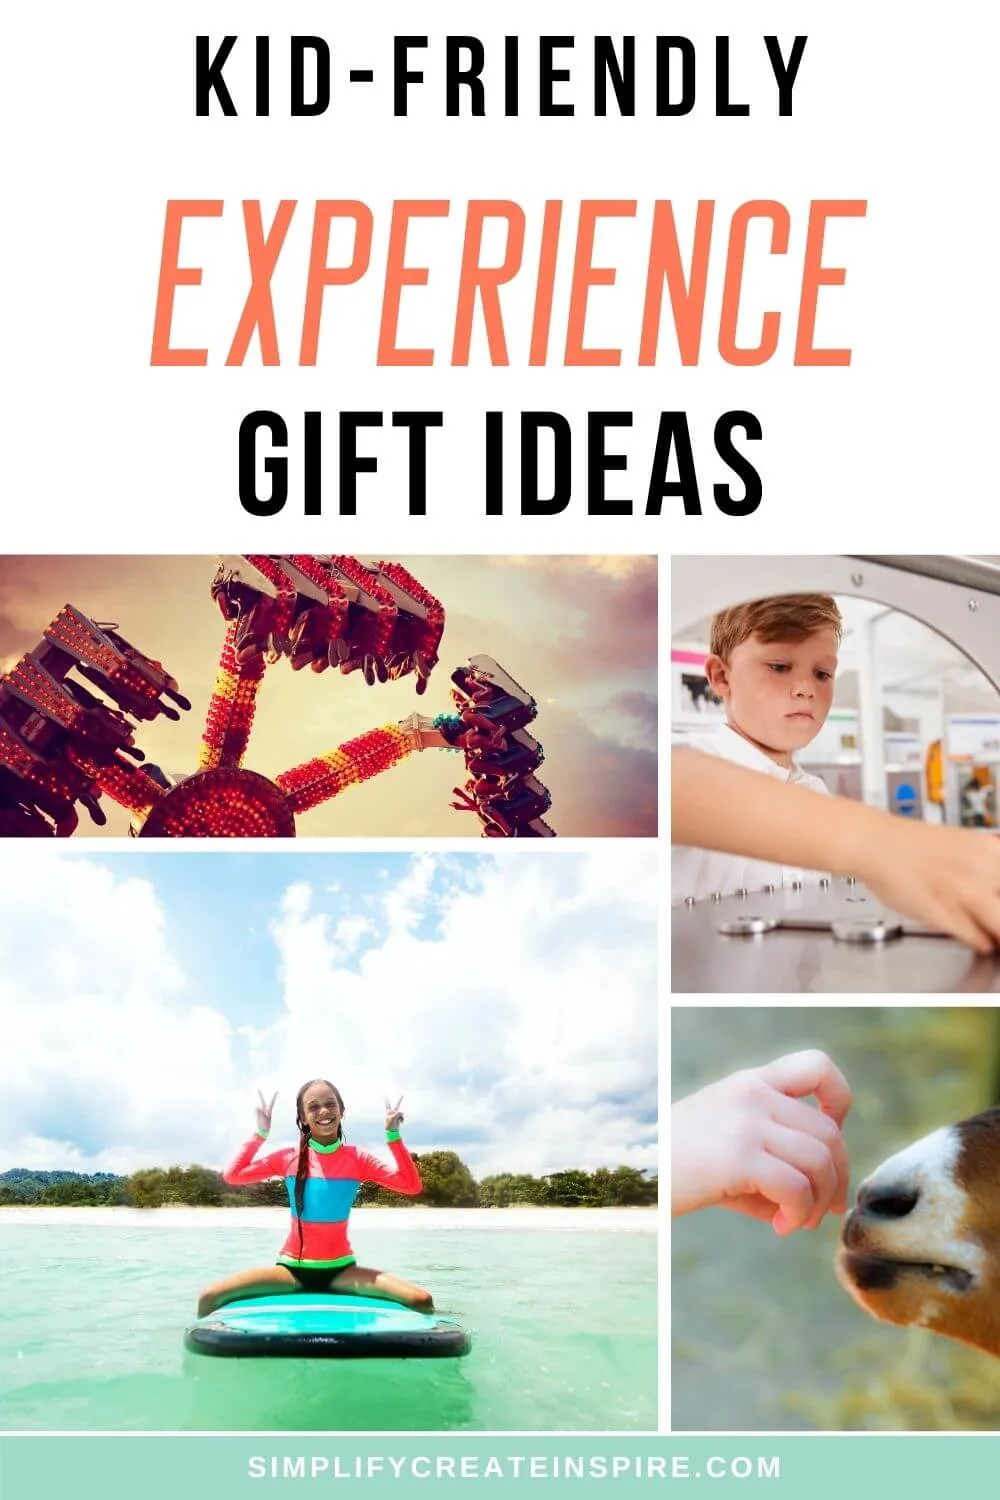 Experience gifts for kids